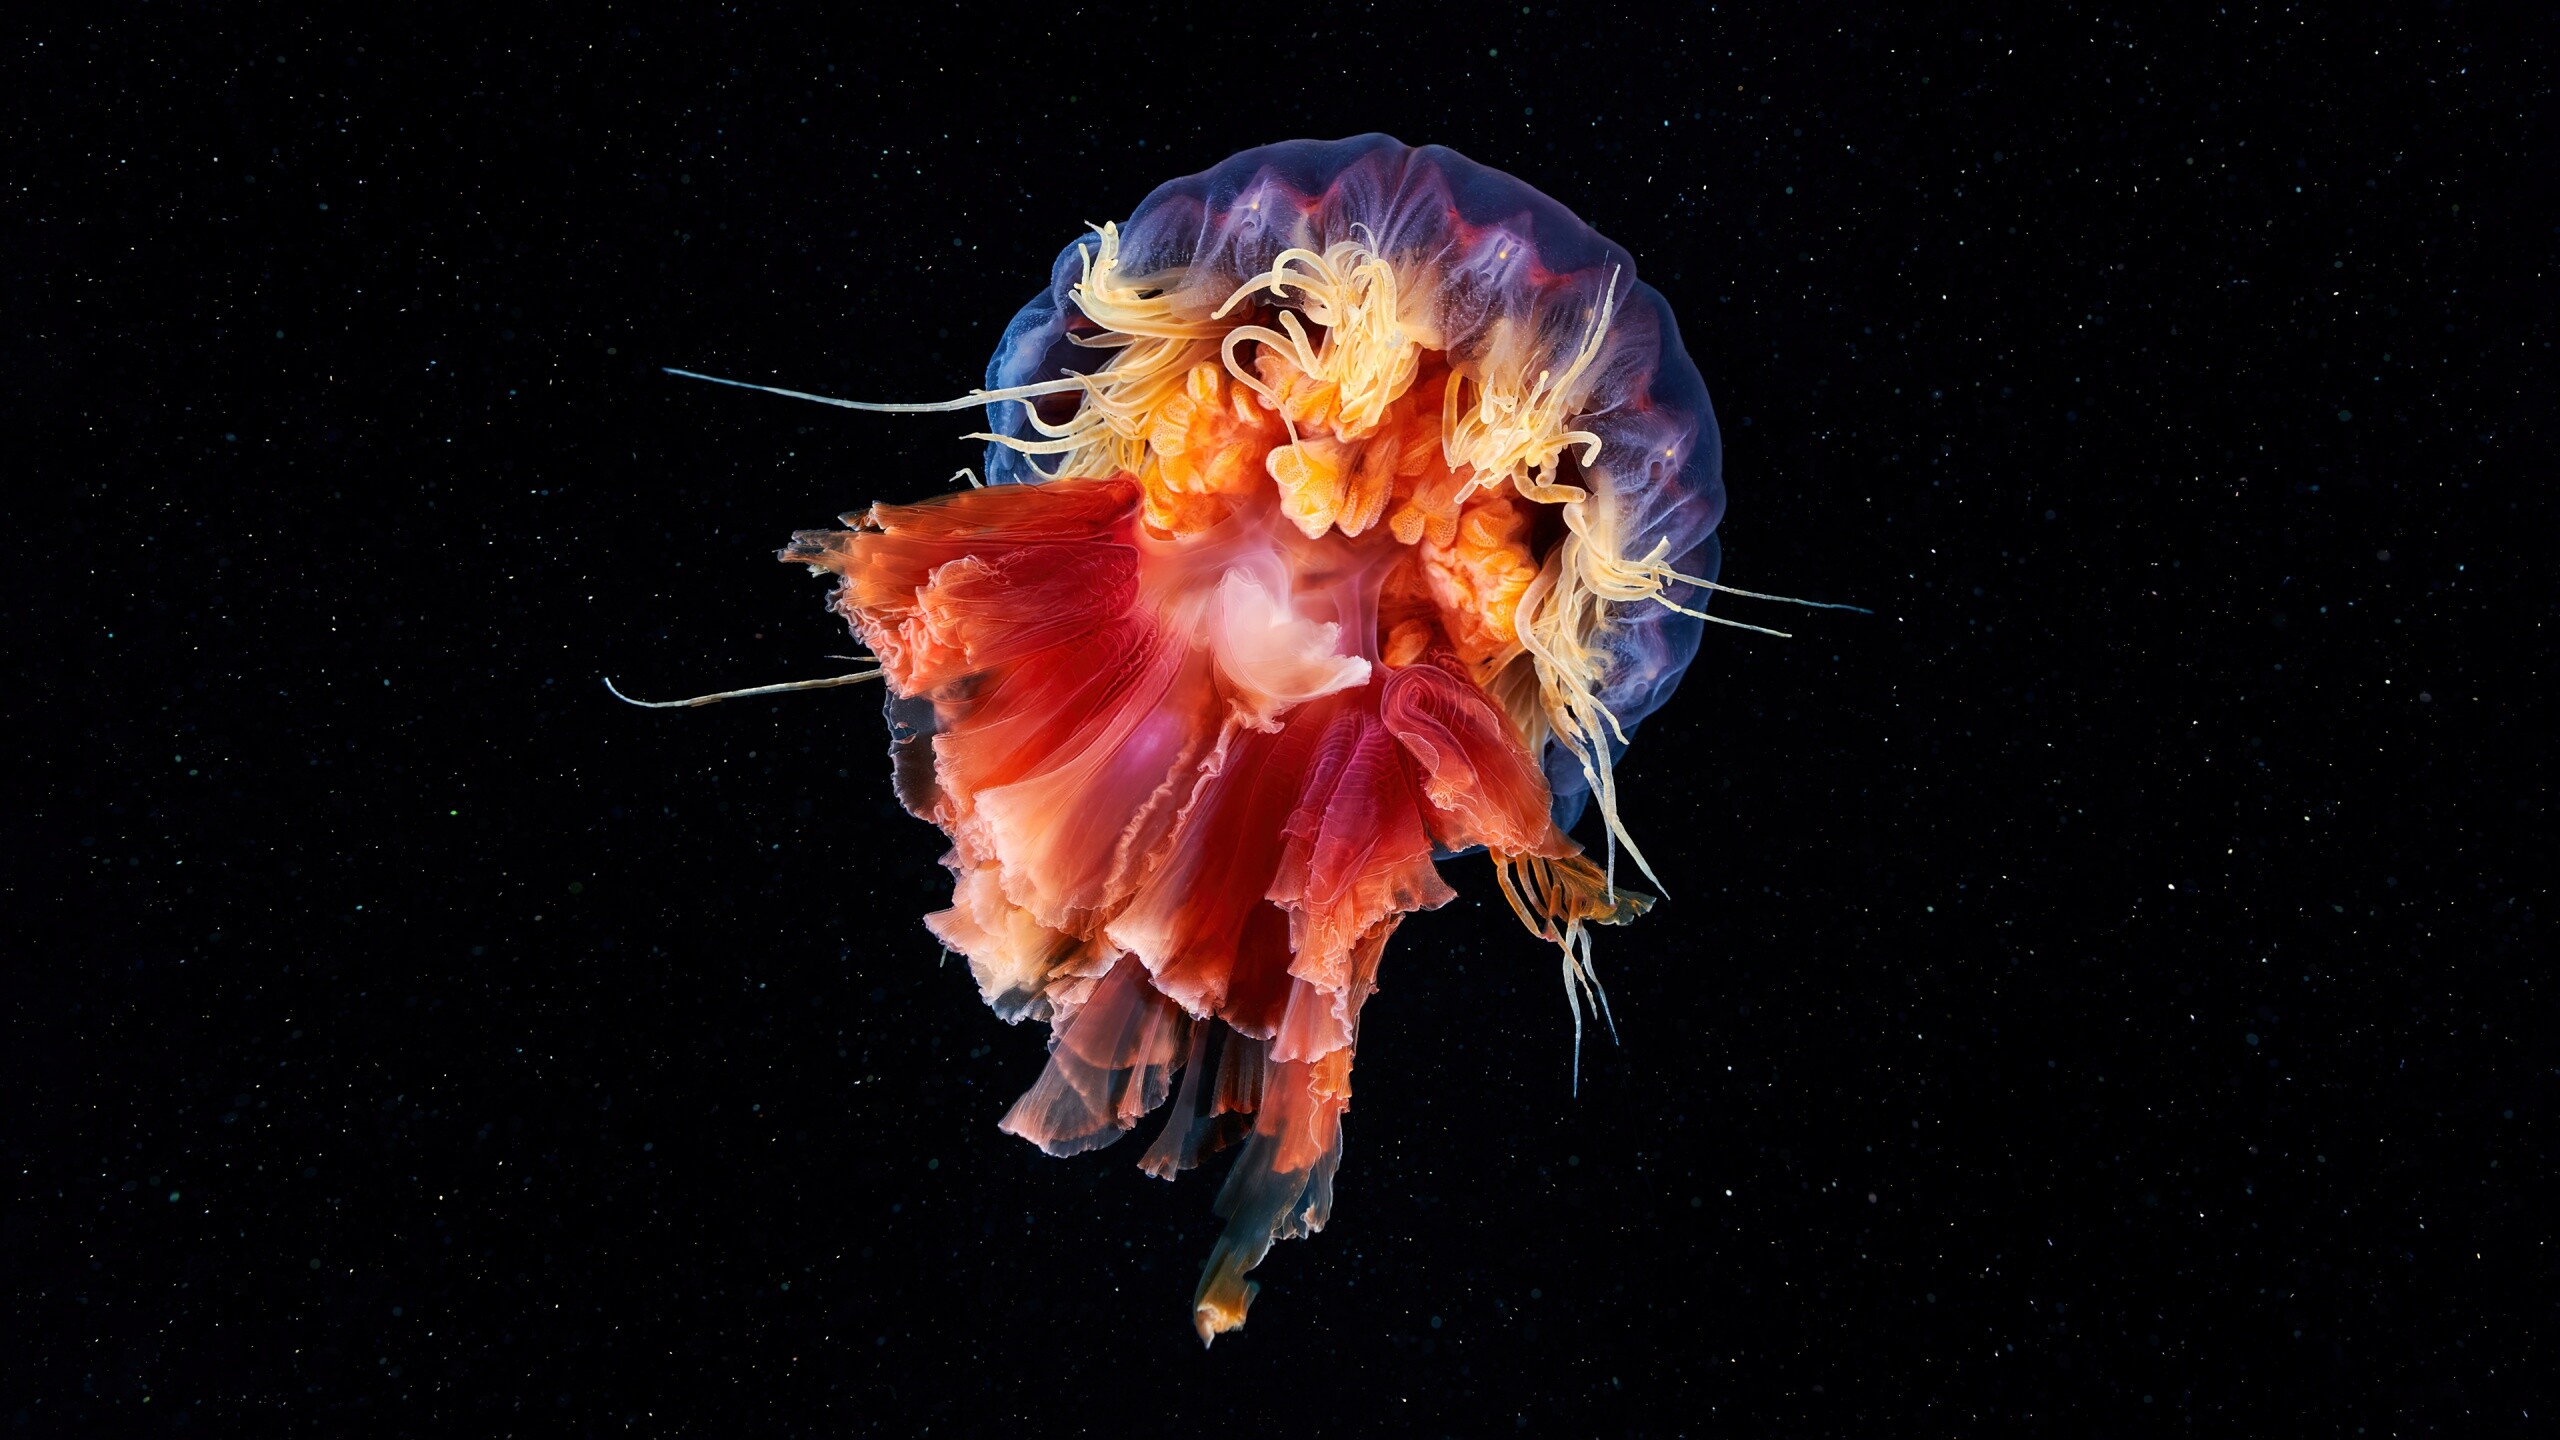 Glowing Jellyfish: Cyanea capillata, Lion's mane jellyfish, The flowing tentacles that surround the bell. 2560x1440 HD Wallpaper.